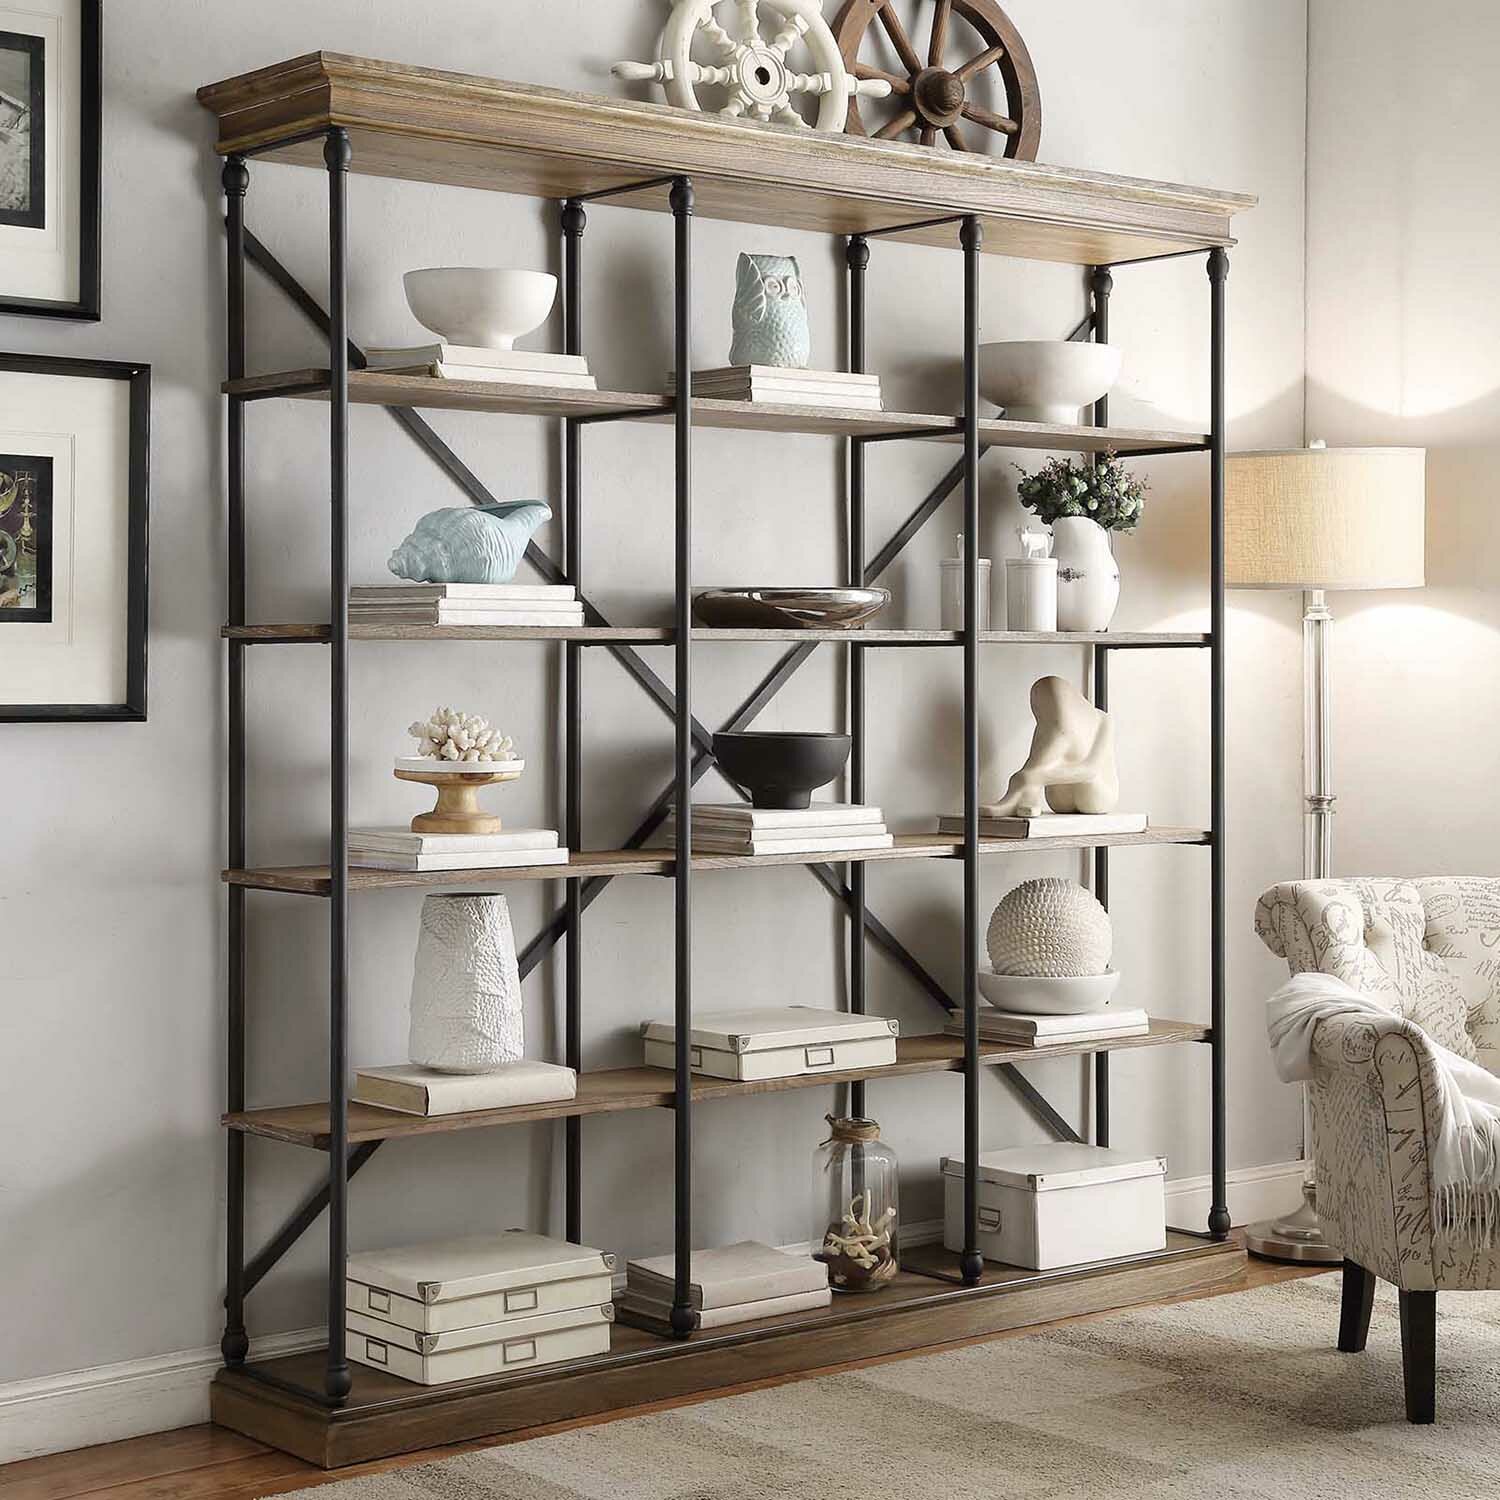 Darby Home Co Eastgate 84" Etagere Bookcase & Reviews ...